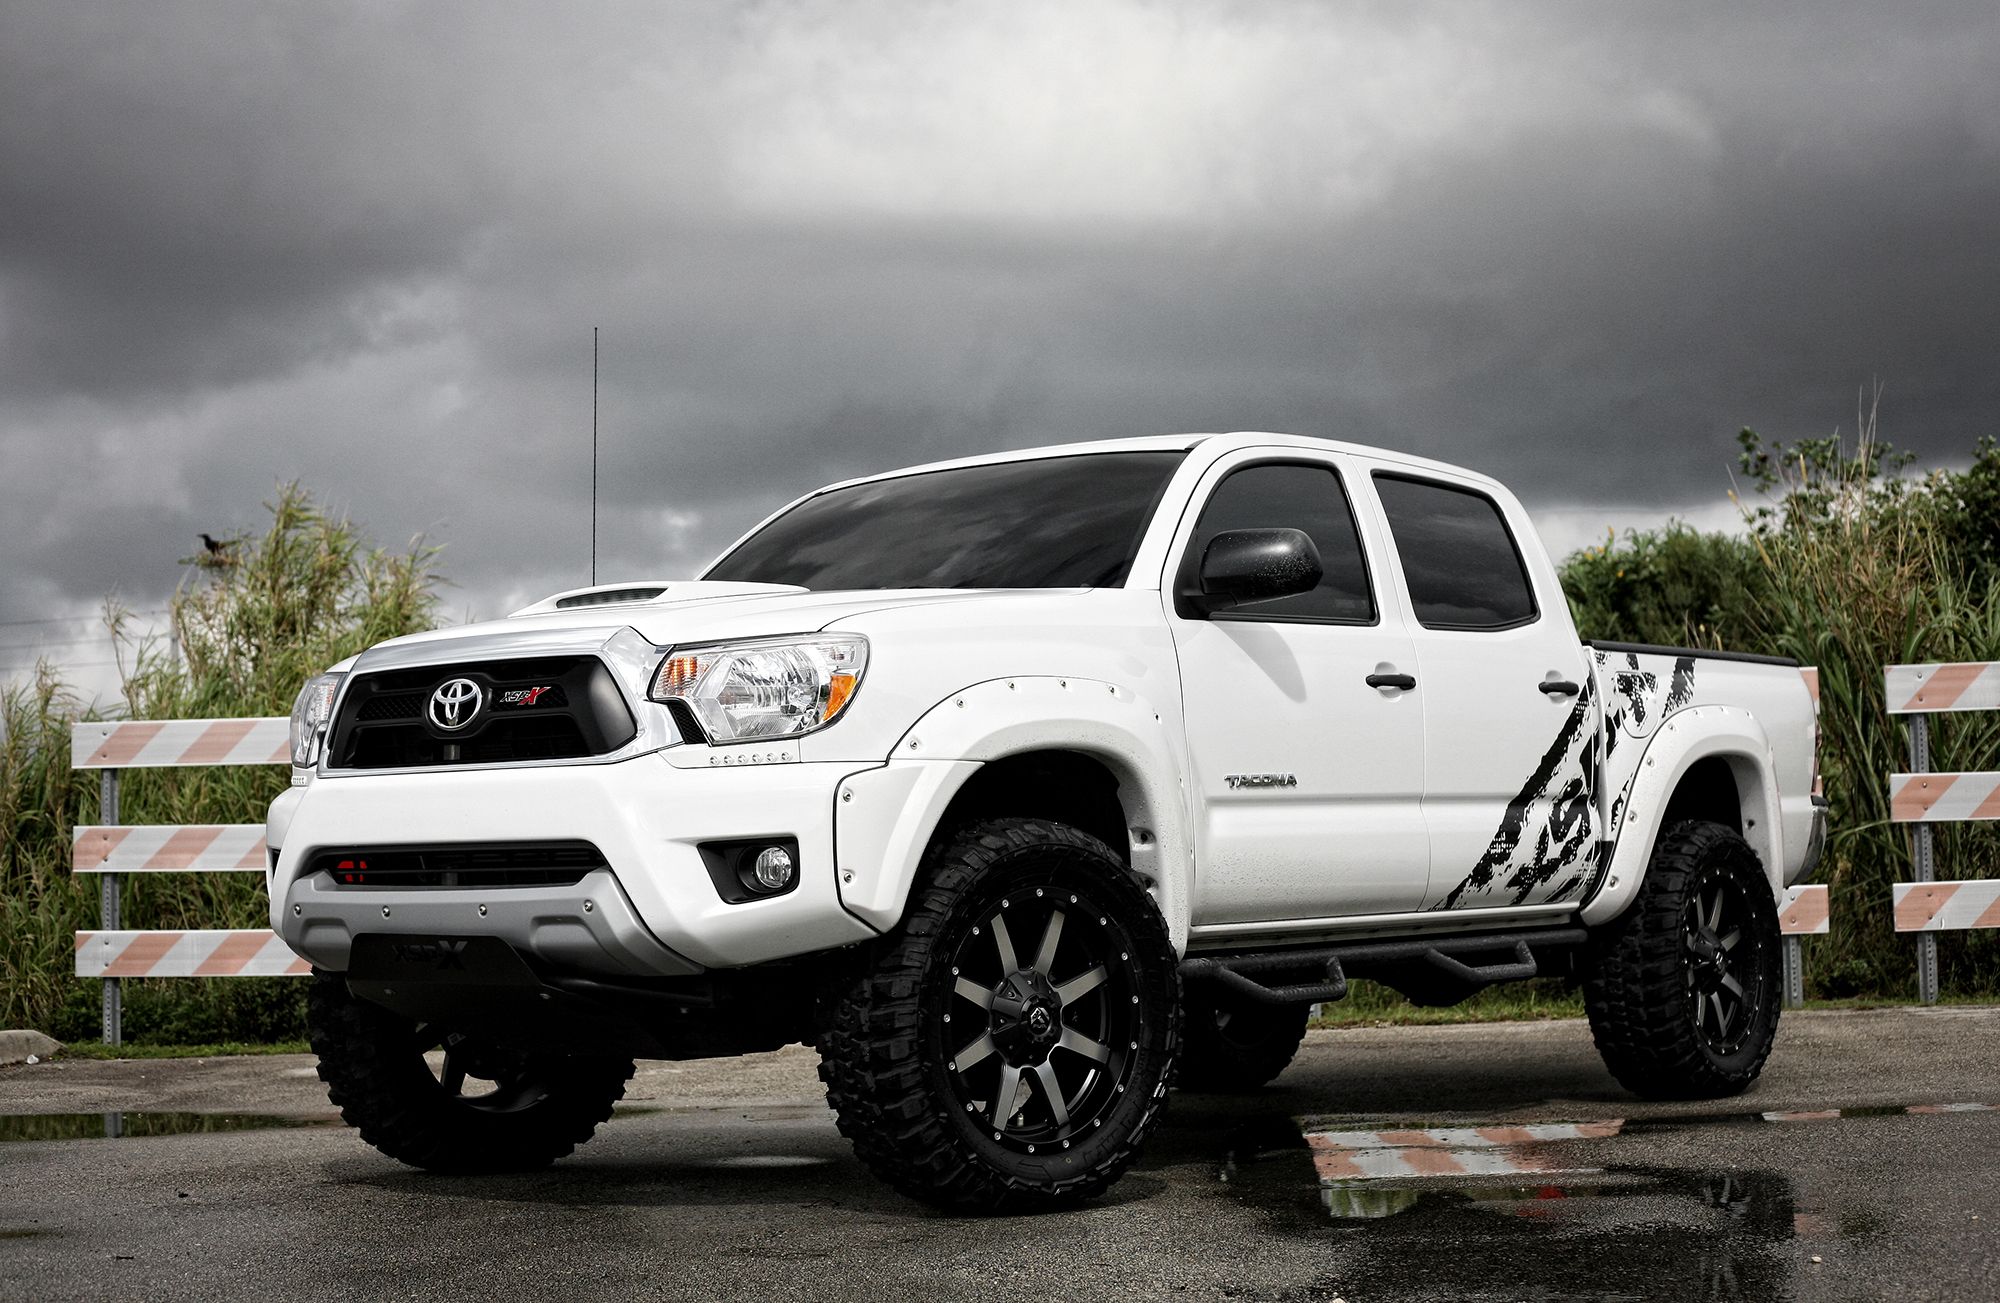 Toyota Tacoma Redesign – Free Cool Wallpapers in HD | New Car ...